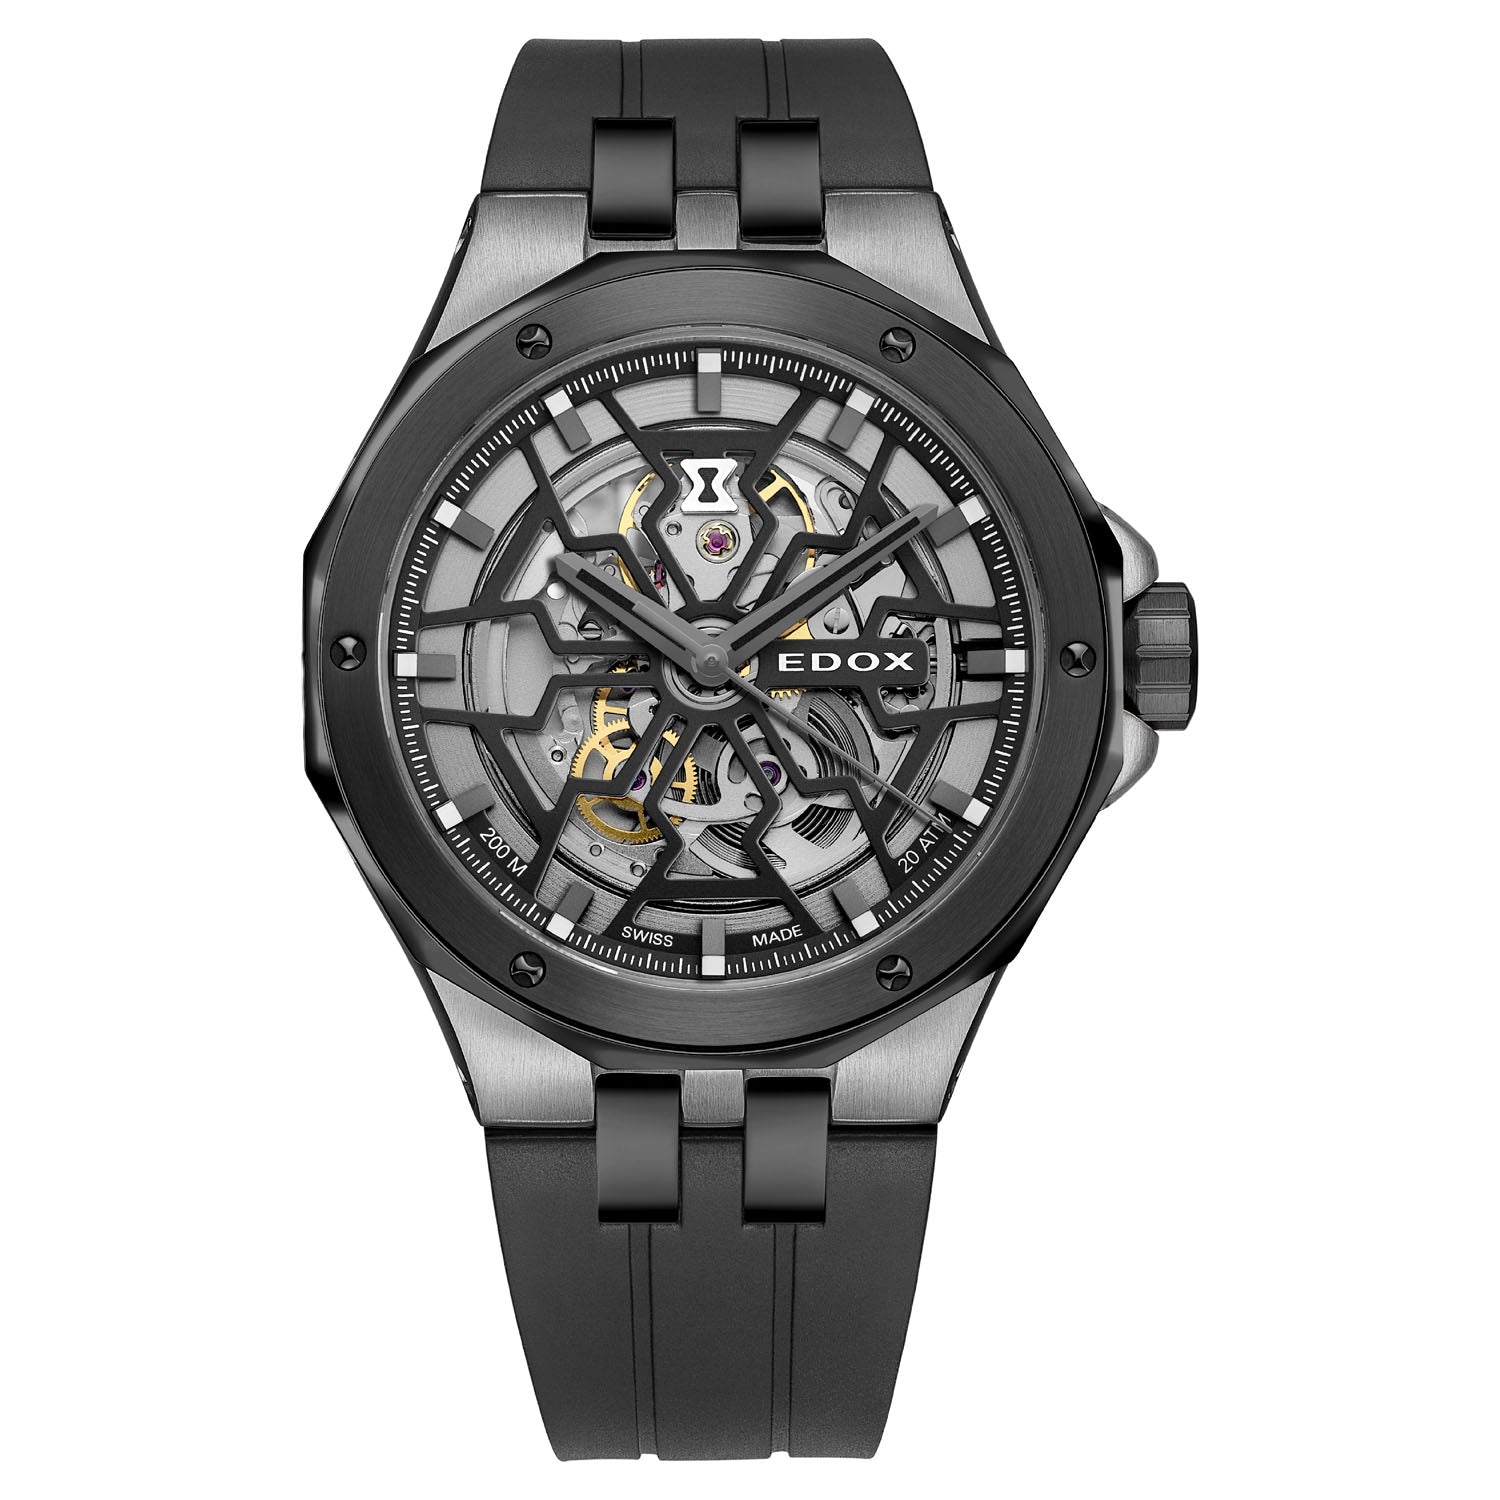 Edox Chronoffshore-1 Automatic Black Dial Men's Watch 80099... for $750 for  sale from a Trusted Seller on Chrono24